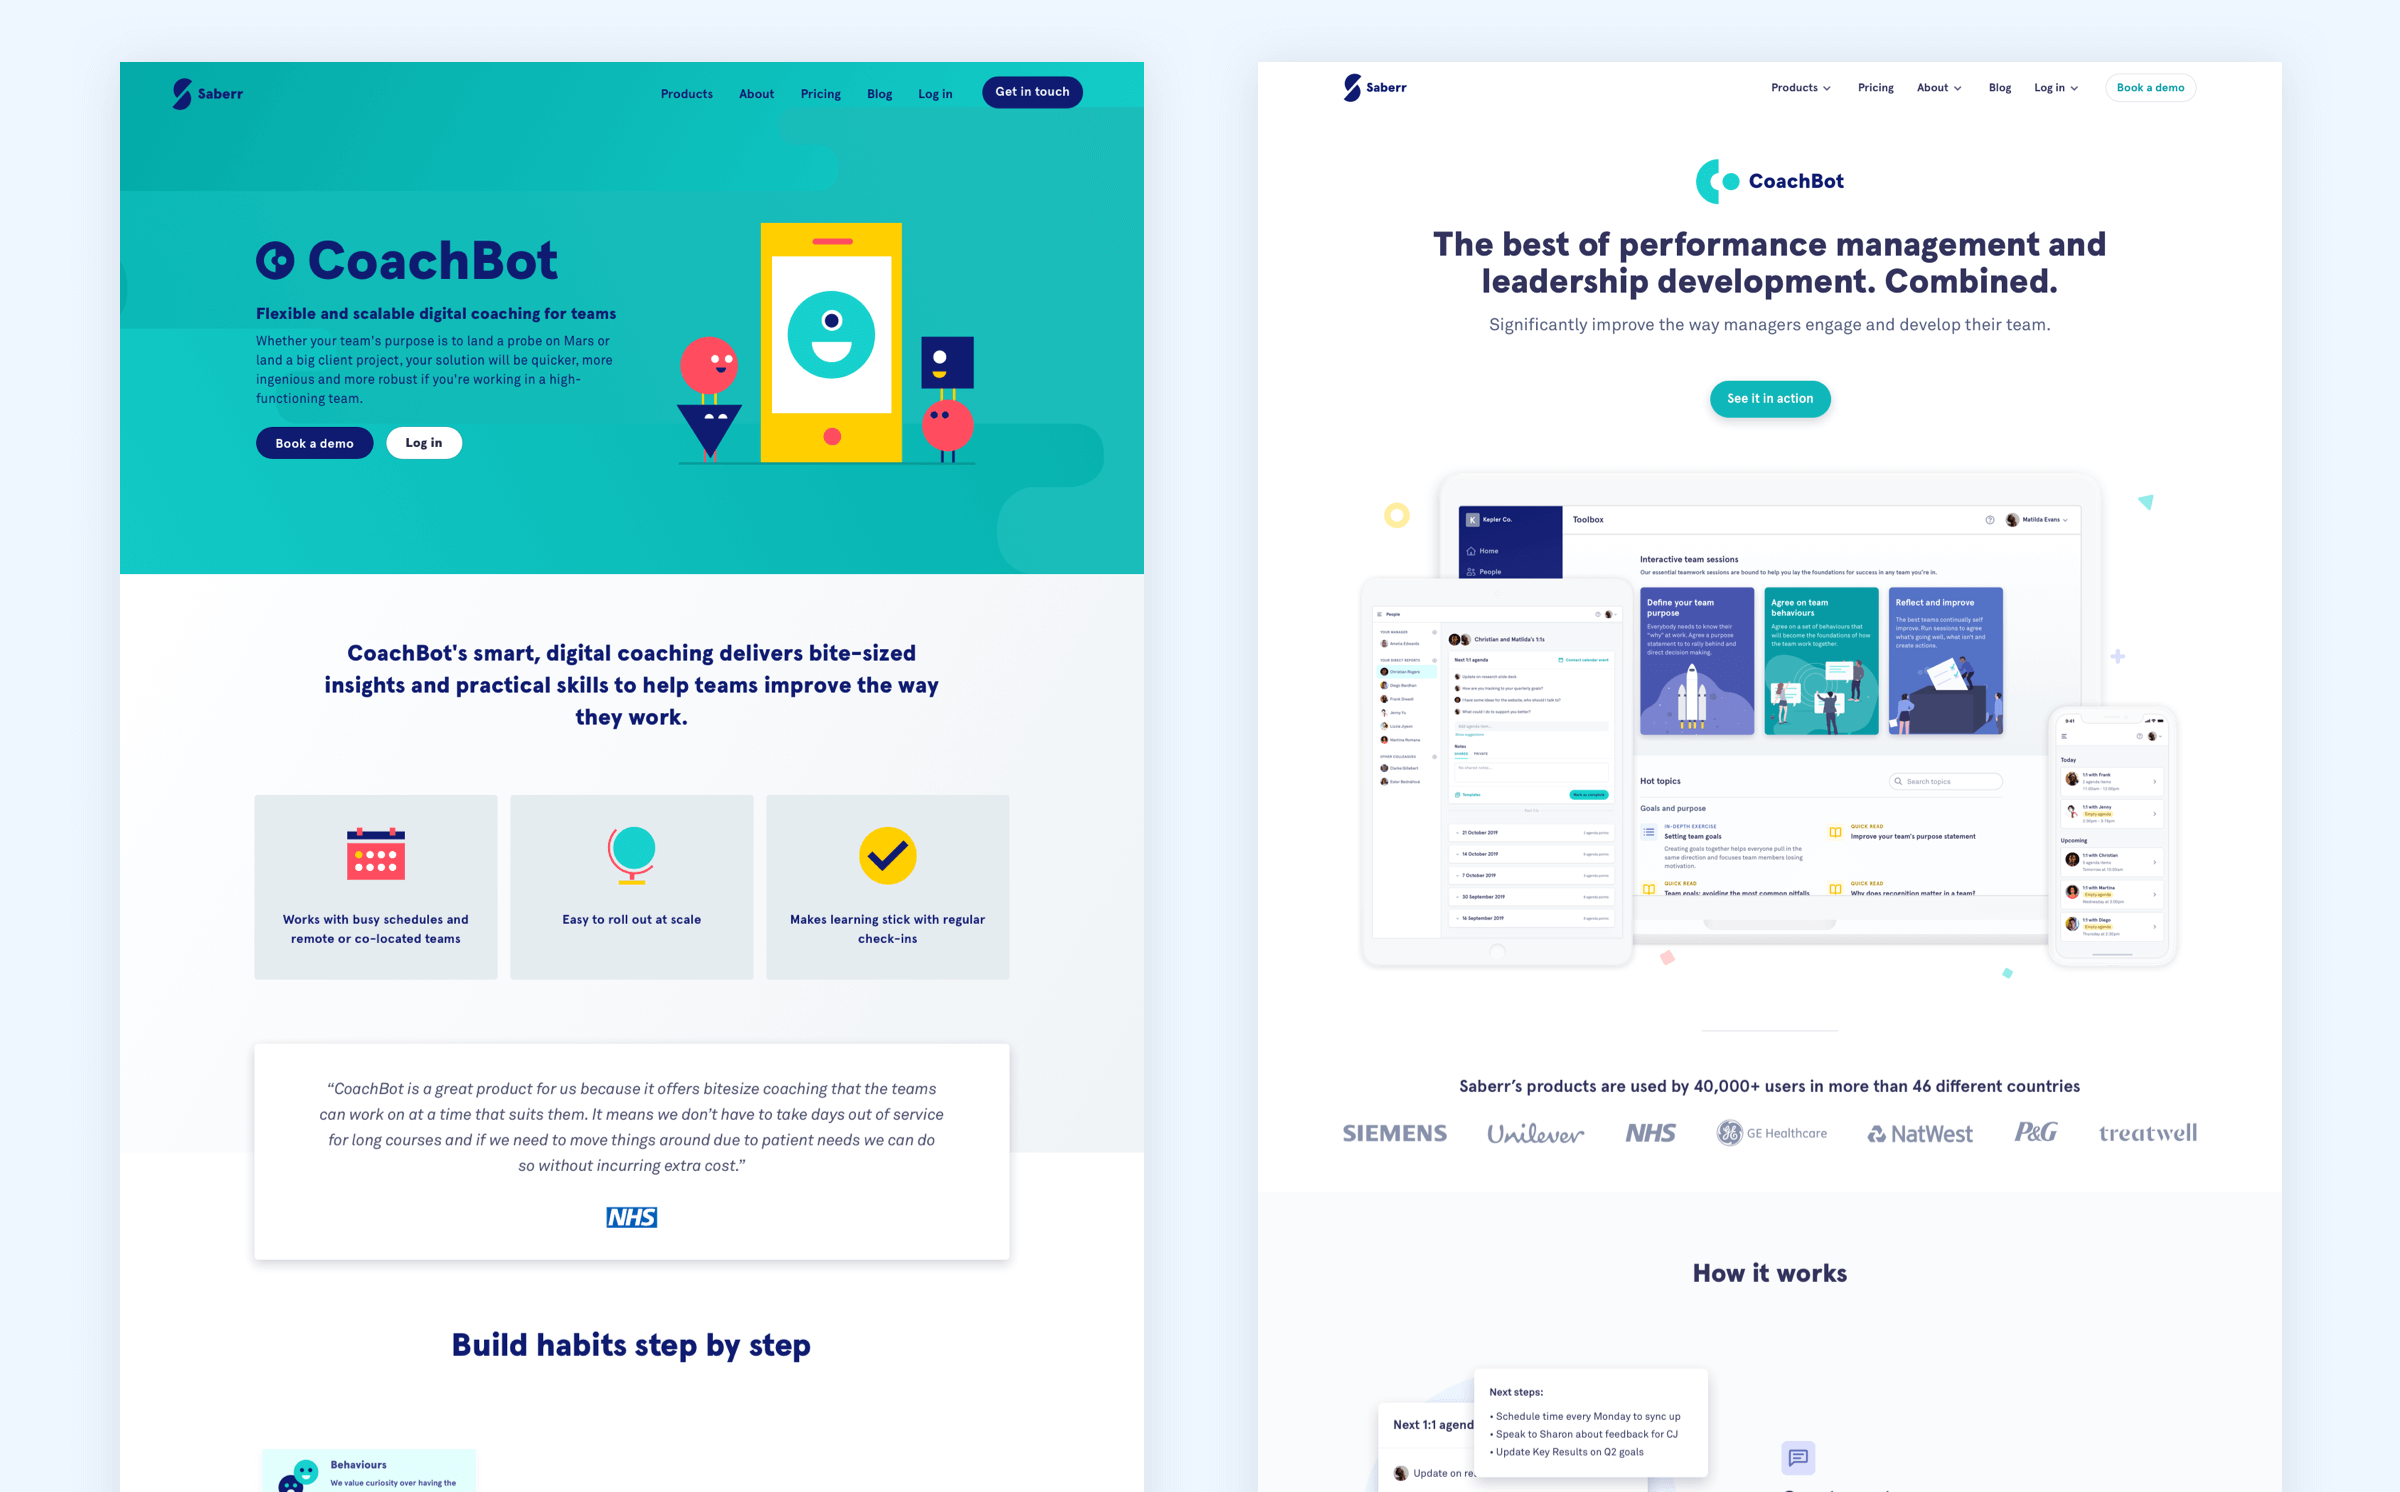 Product page before and after